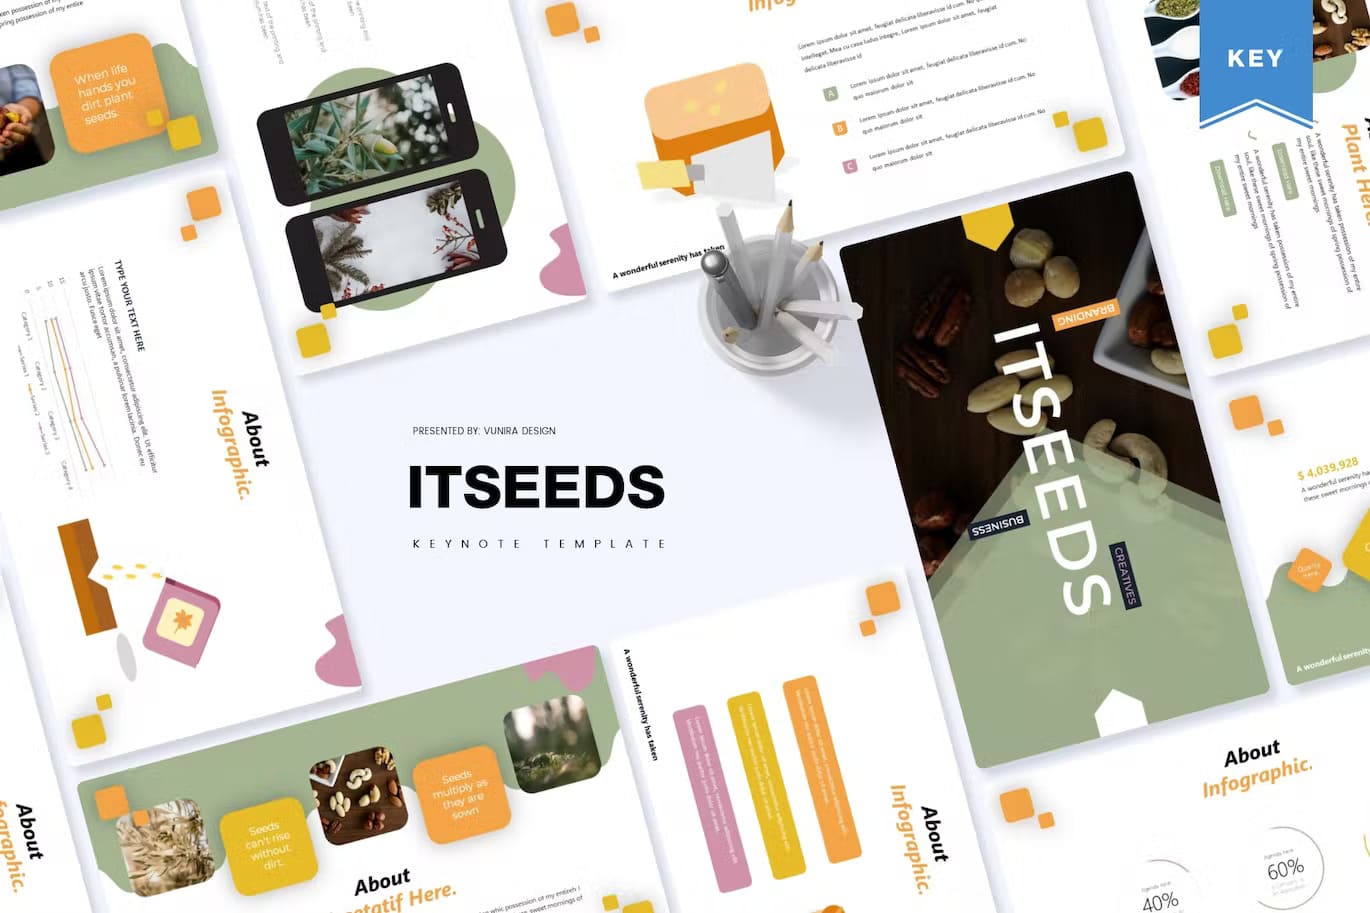 A wonderful serenity has taken with the Itseeds keynote template.